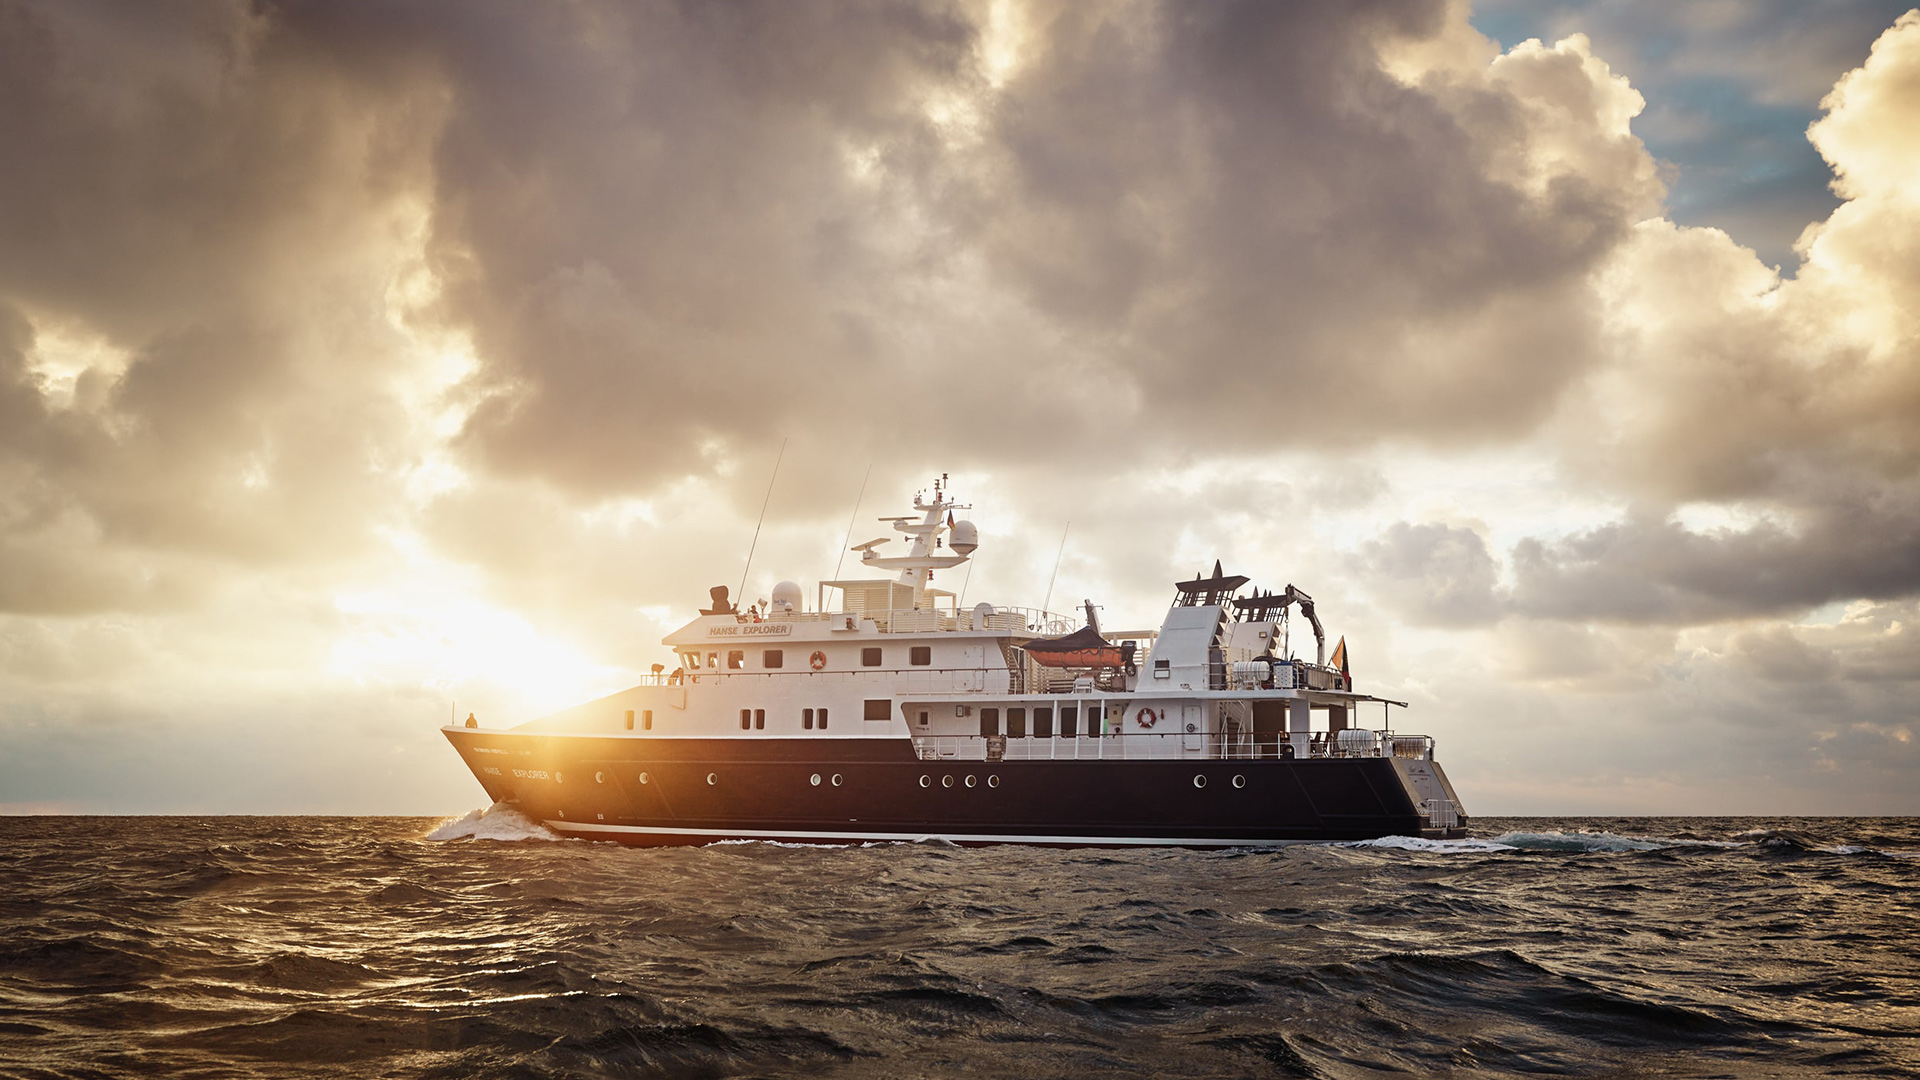 Hanse Explorer Receives Multi-Million Dollar Refit; Heads to South Pacific for Summer 2022